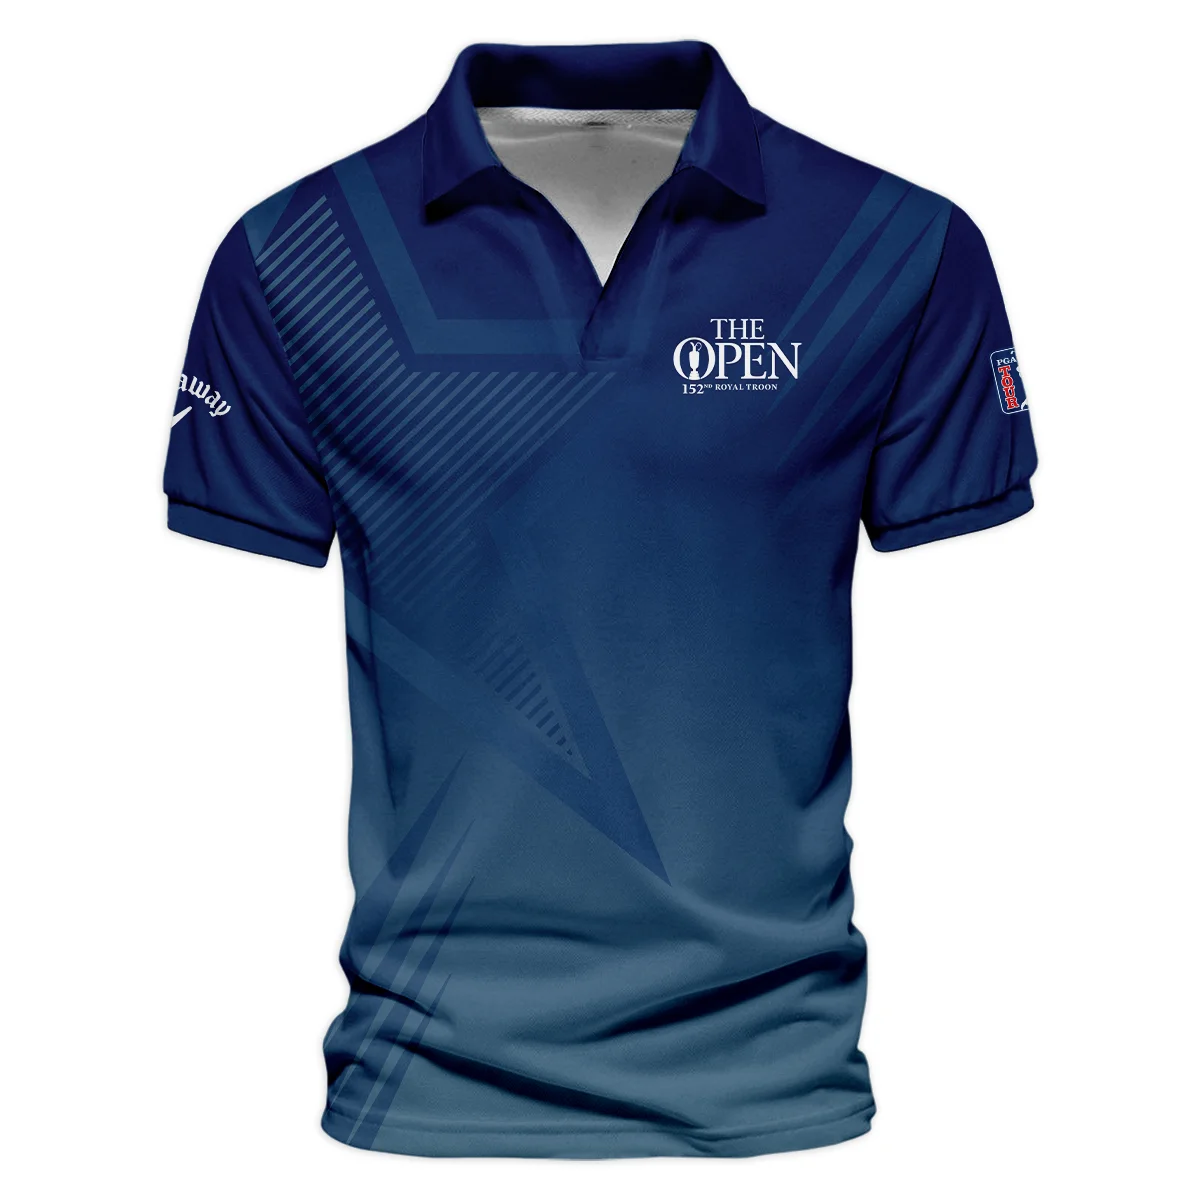 Callaway 152nd Open Championship Abstract Background Dark Blue Gradient Star Line Sleeveless Jacket All Over Prints HOTOP260624A04CLWSJK